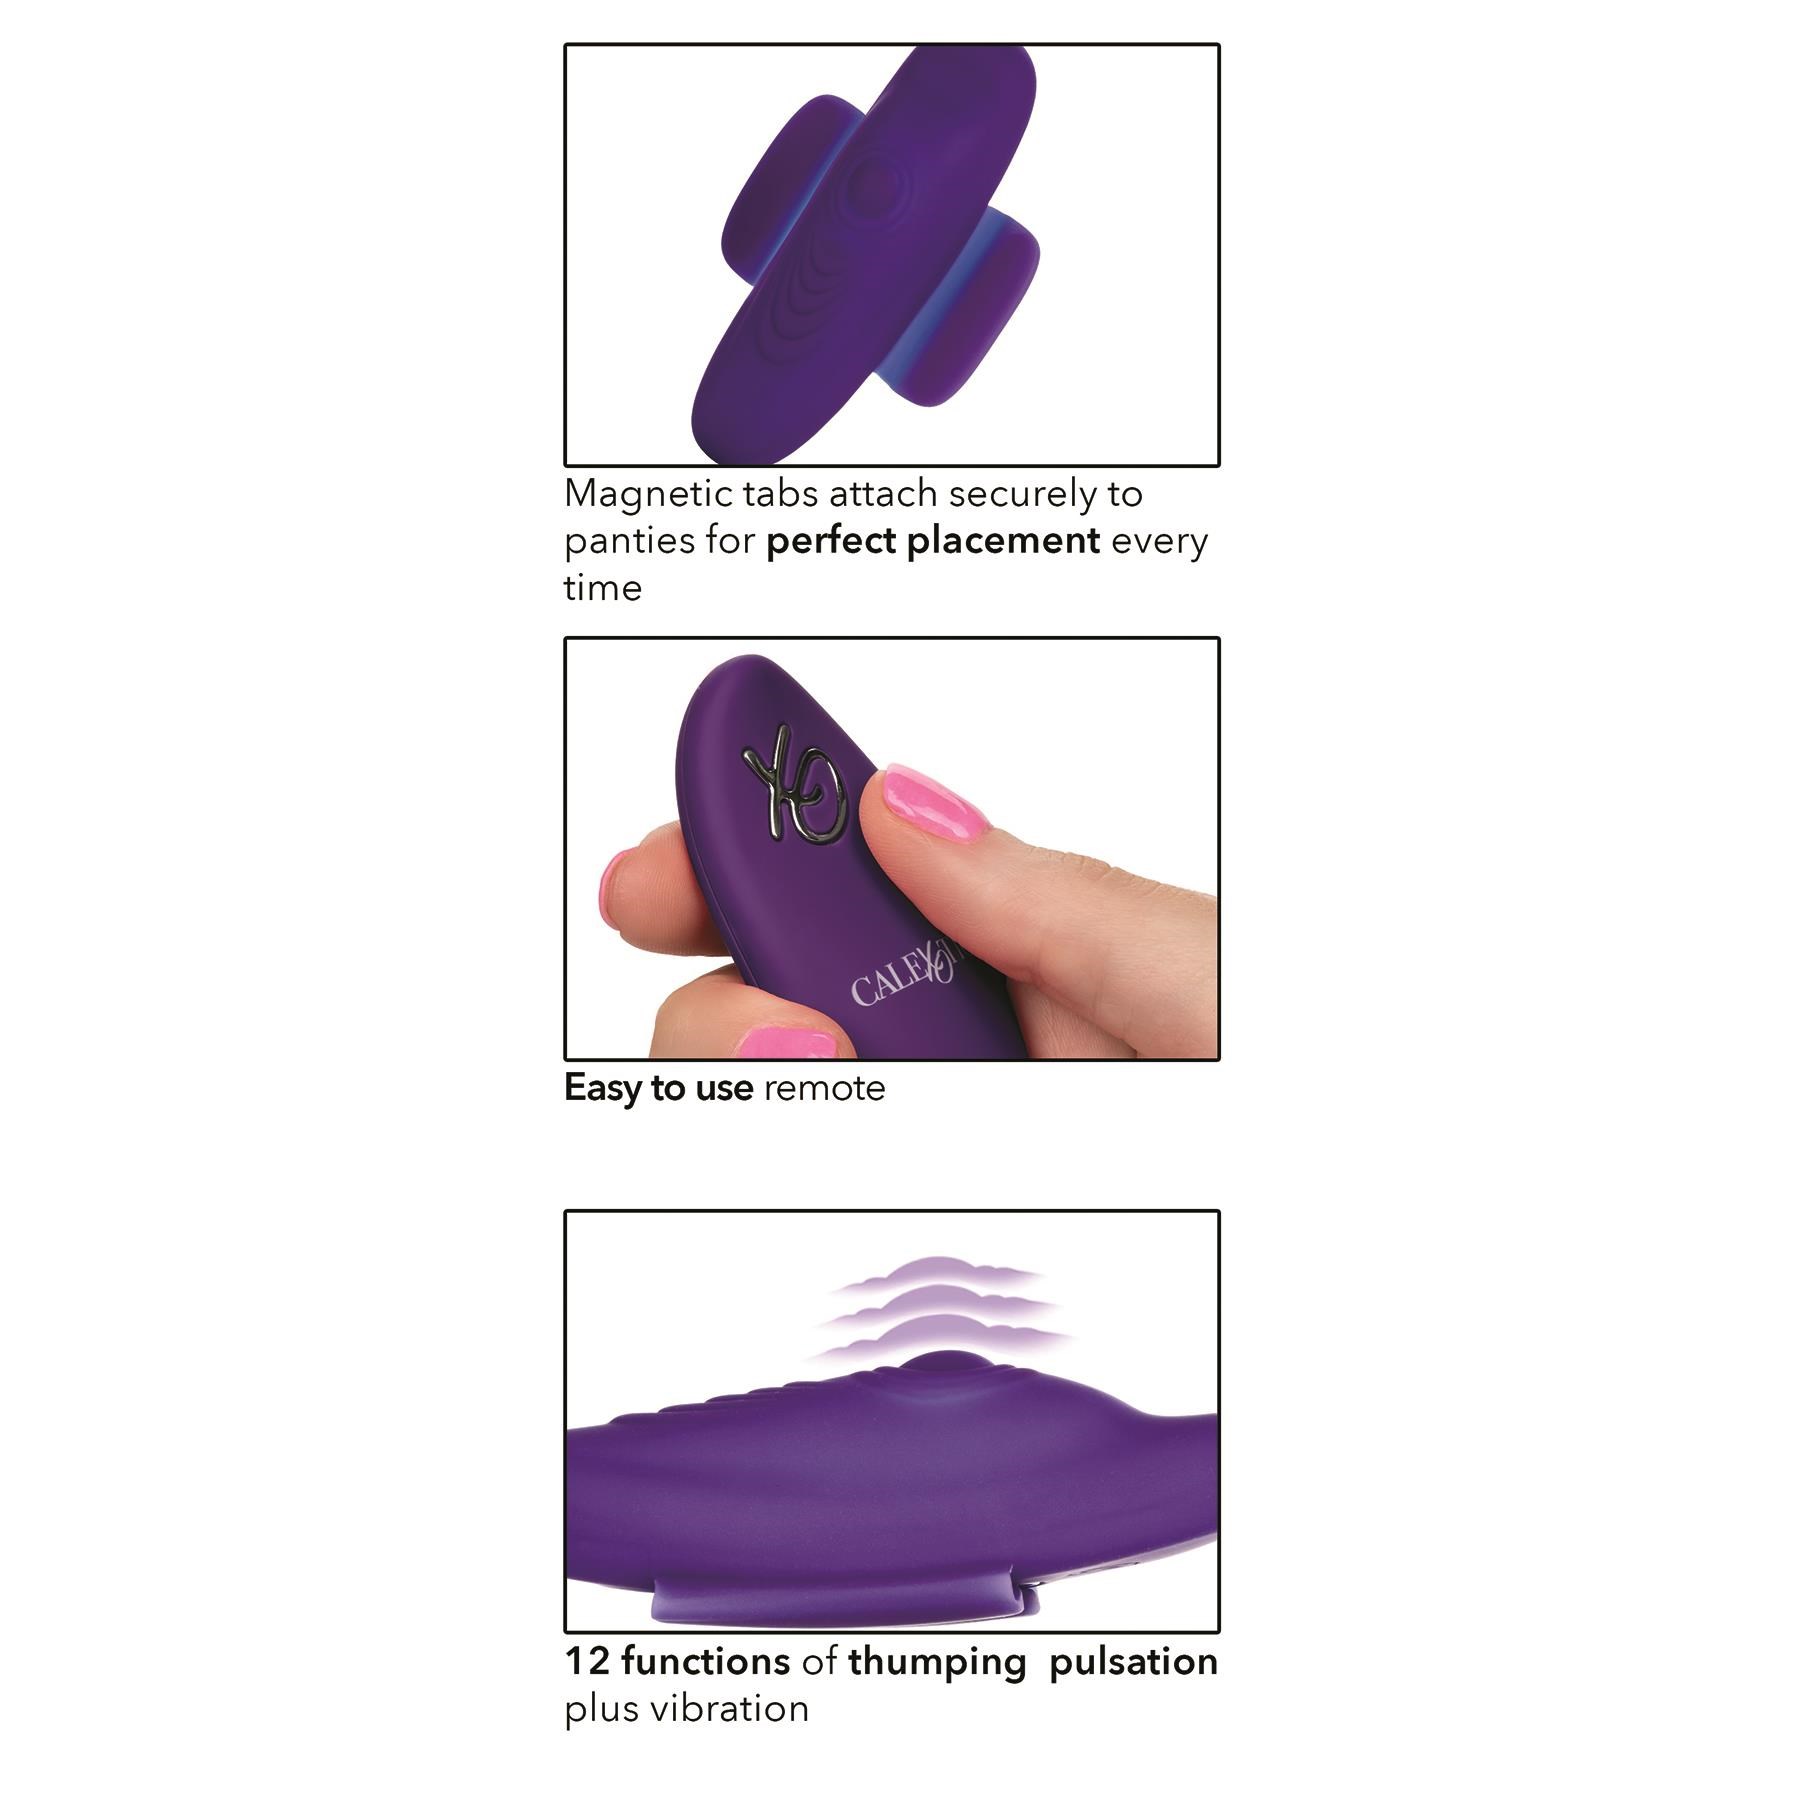 Lock-N-Play Remote Pulsating Panty Teaser - Instructions